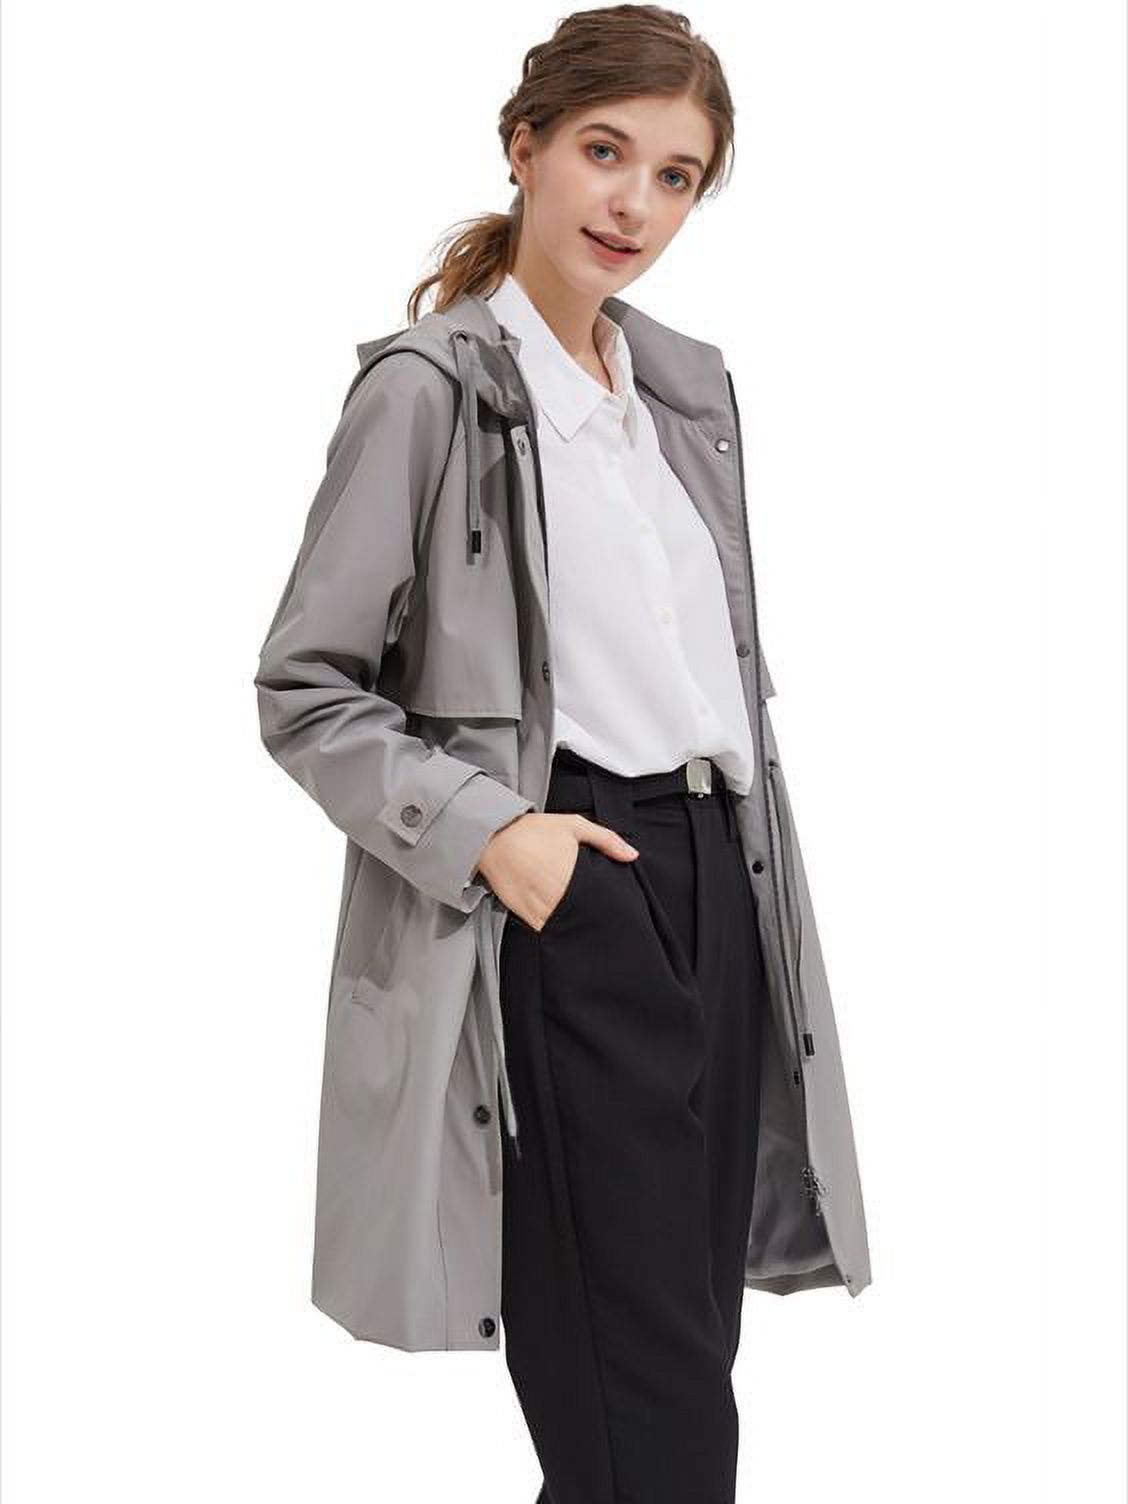 Orolay Women's Double Breasted Long Trench Coat with Belt - image 2 of 5